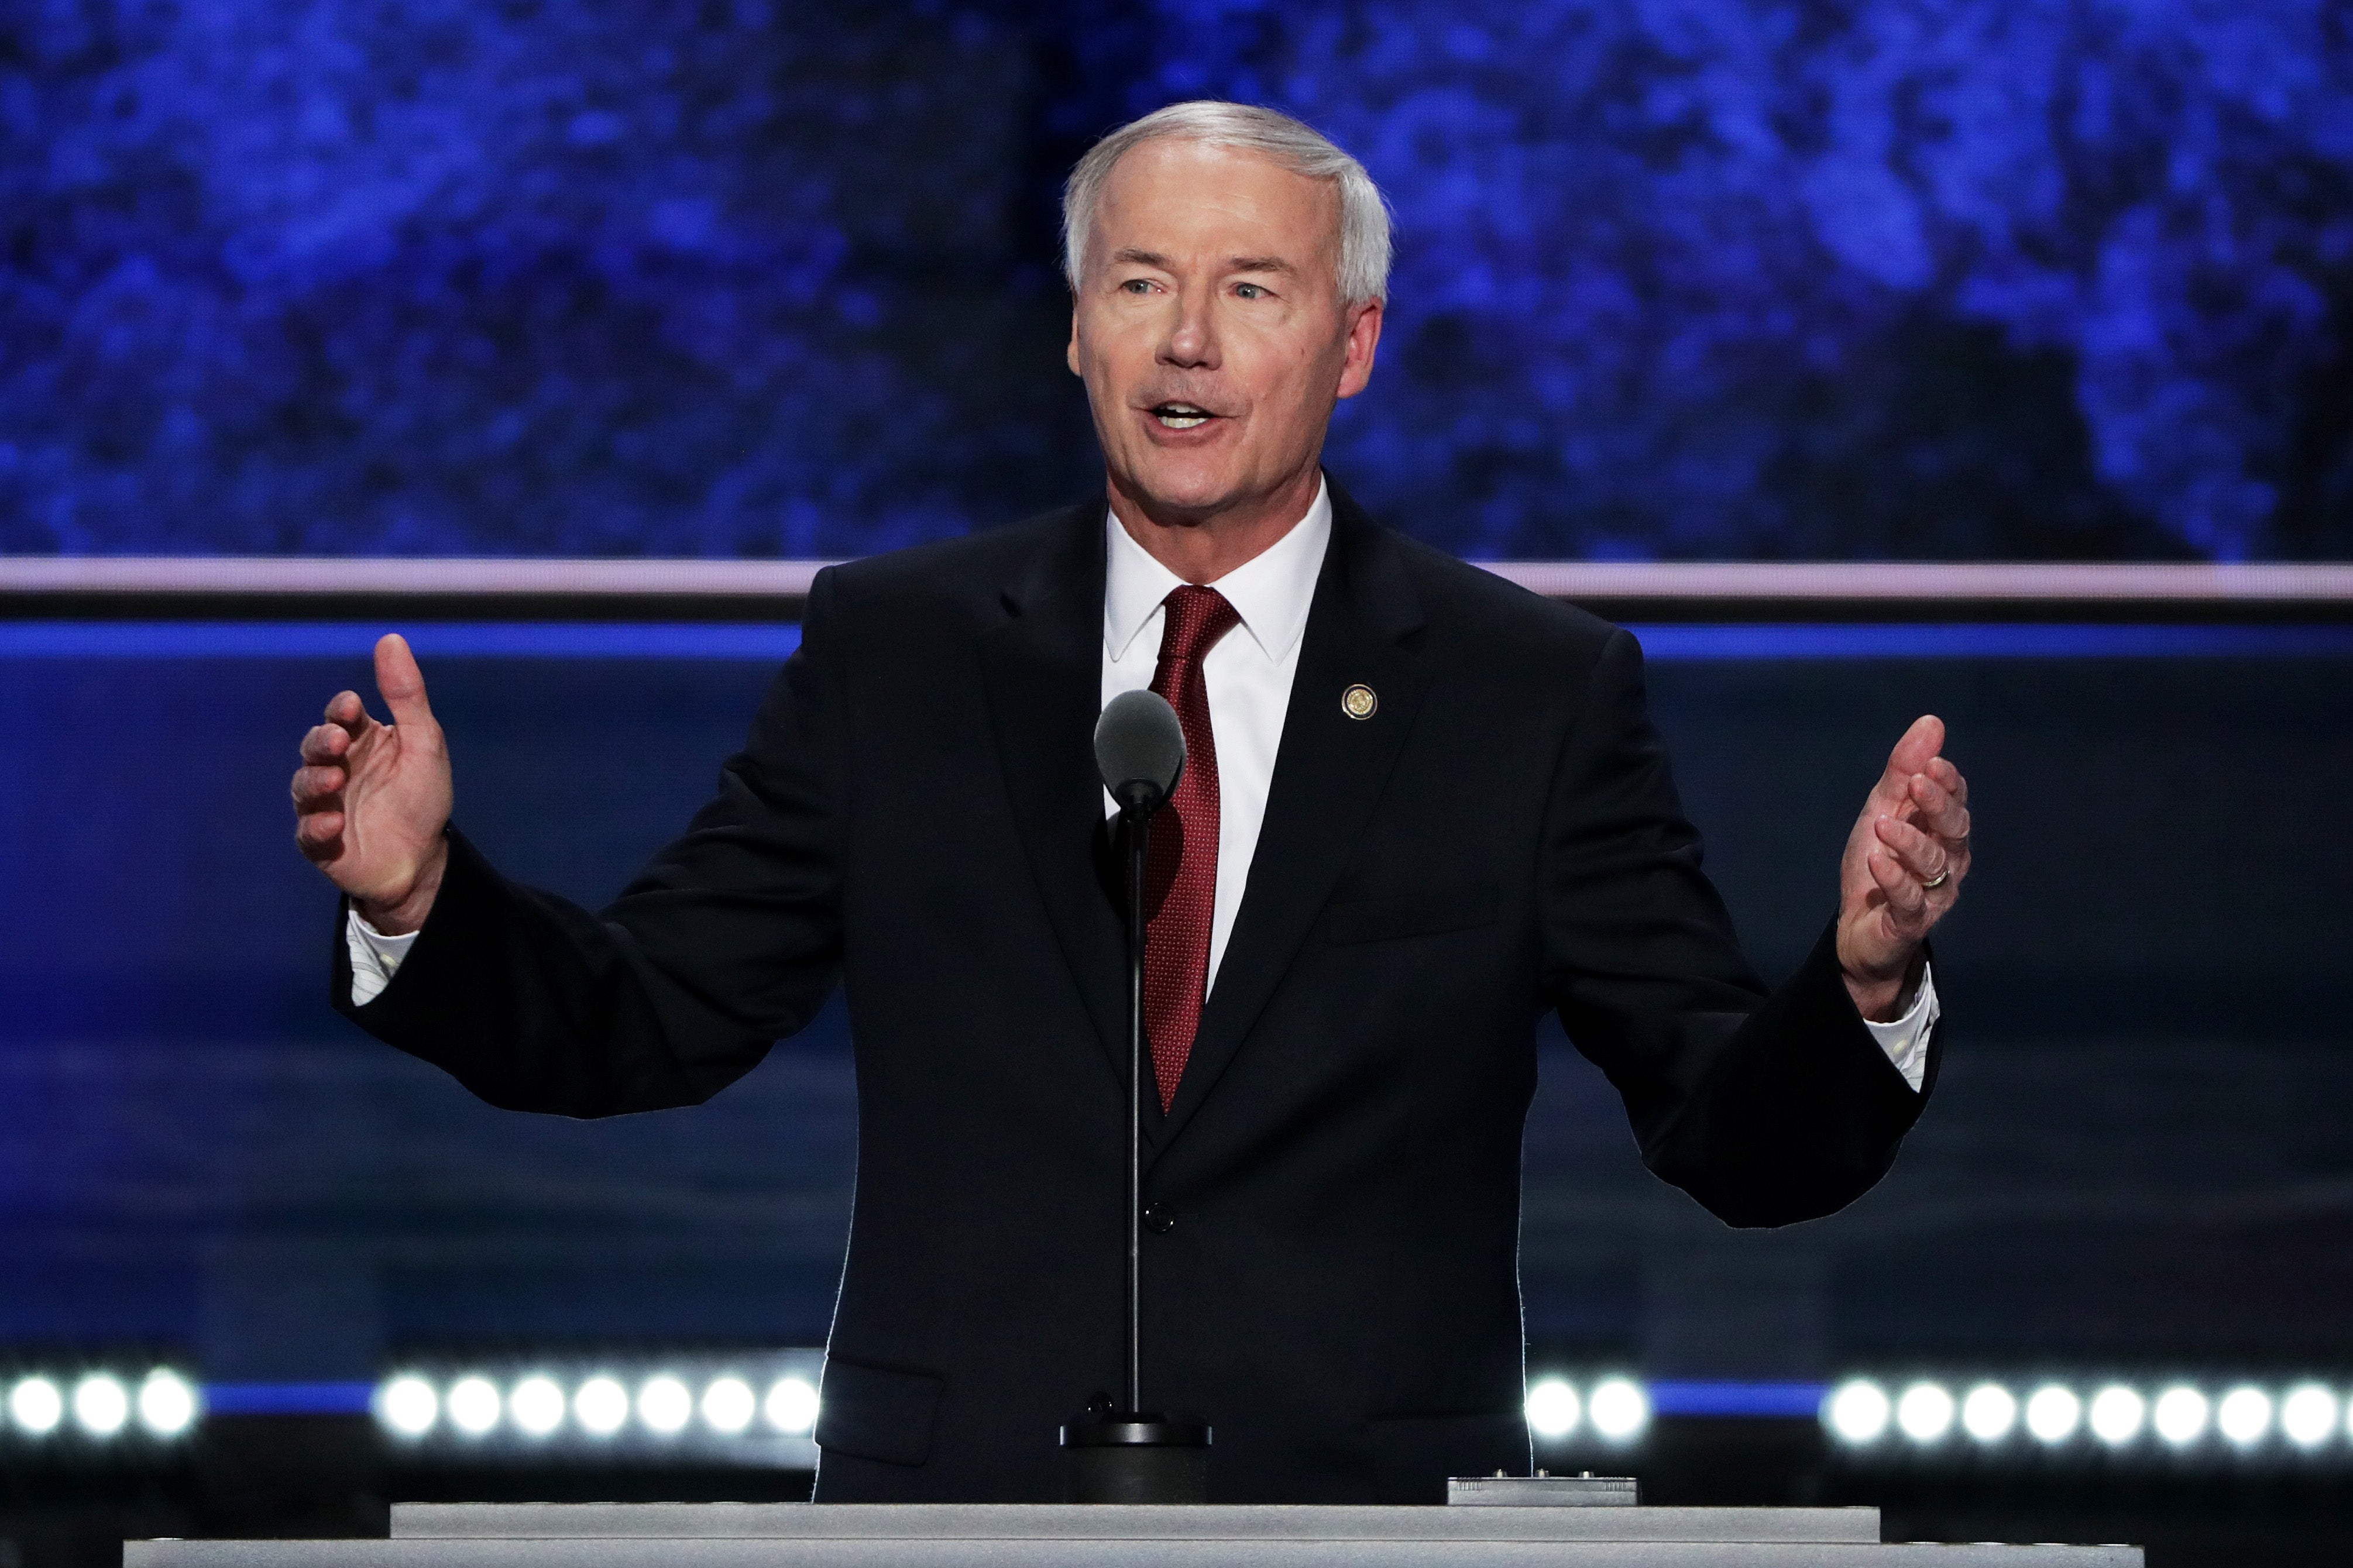 Arkansas Governor Asa Hutchinson signs bill that bans nearly all abortion services in his state